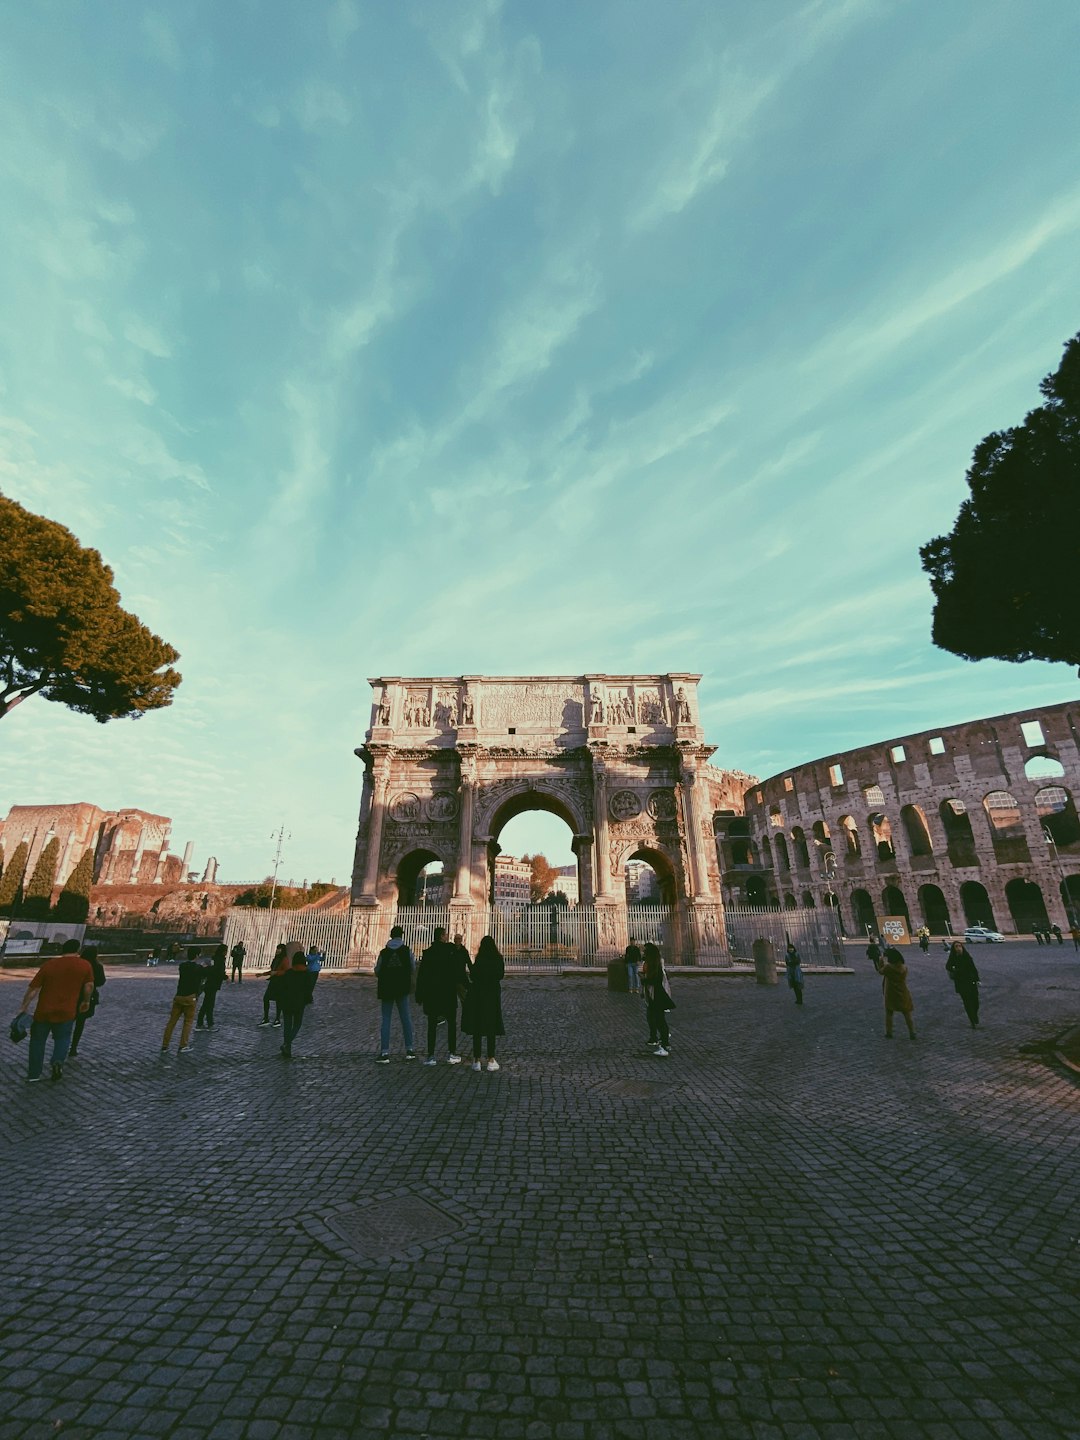 people standing near The Colosseum